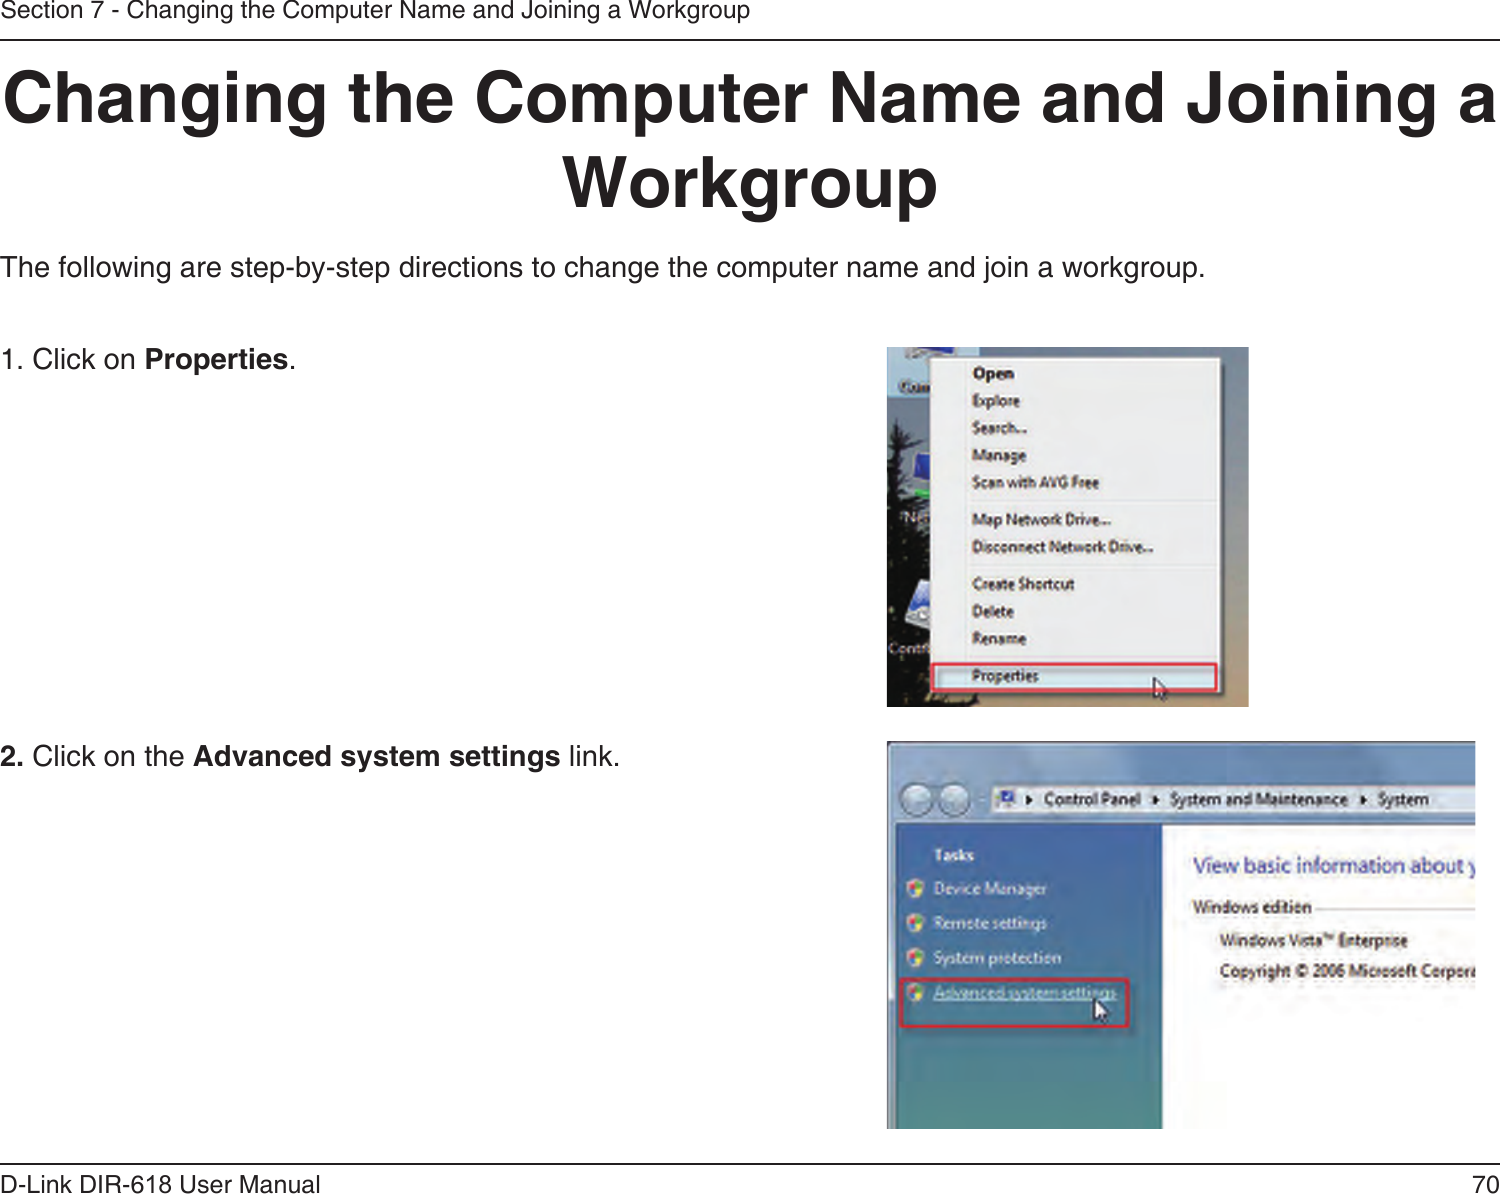 70D-Link DIR-618 User ManualSection 7 - Changing the Computer Name and Joining a WorkgroupChanging the Computer Name and Joining a WorkgroupThe following are step-by-step directions to change the computer name and join a workgroup.      2. Click on the Advanced system settings link. 1. Click on Properties.